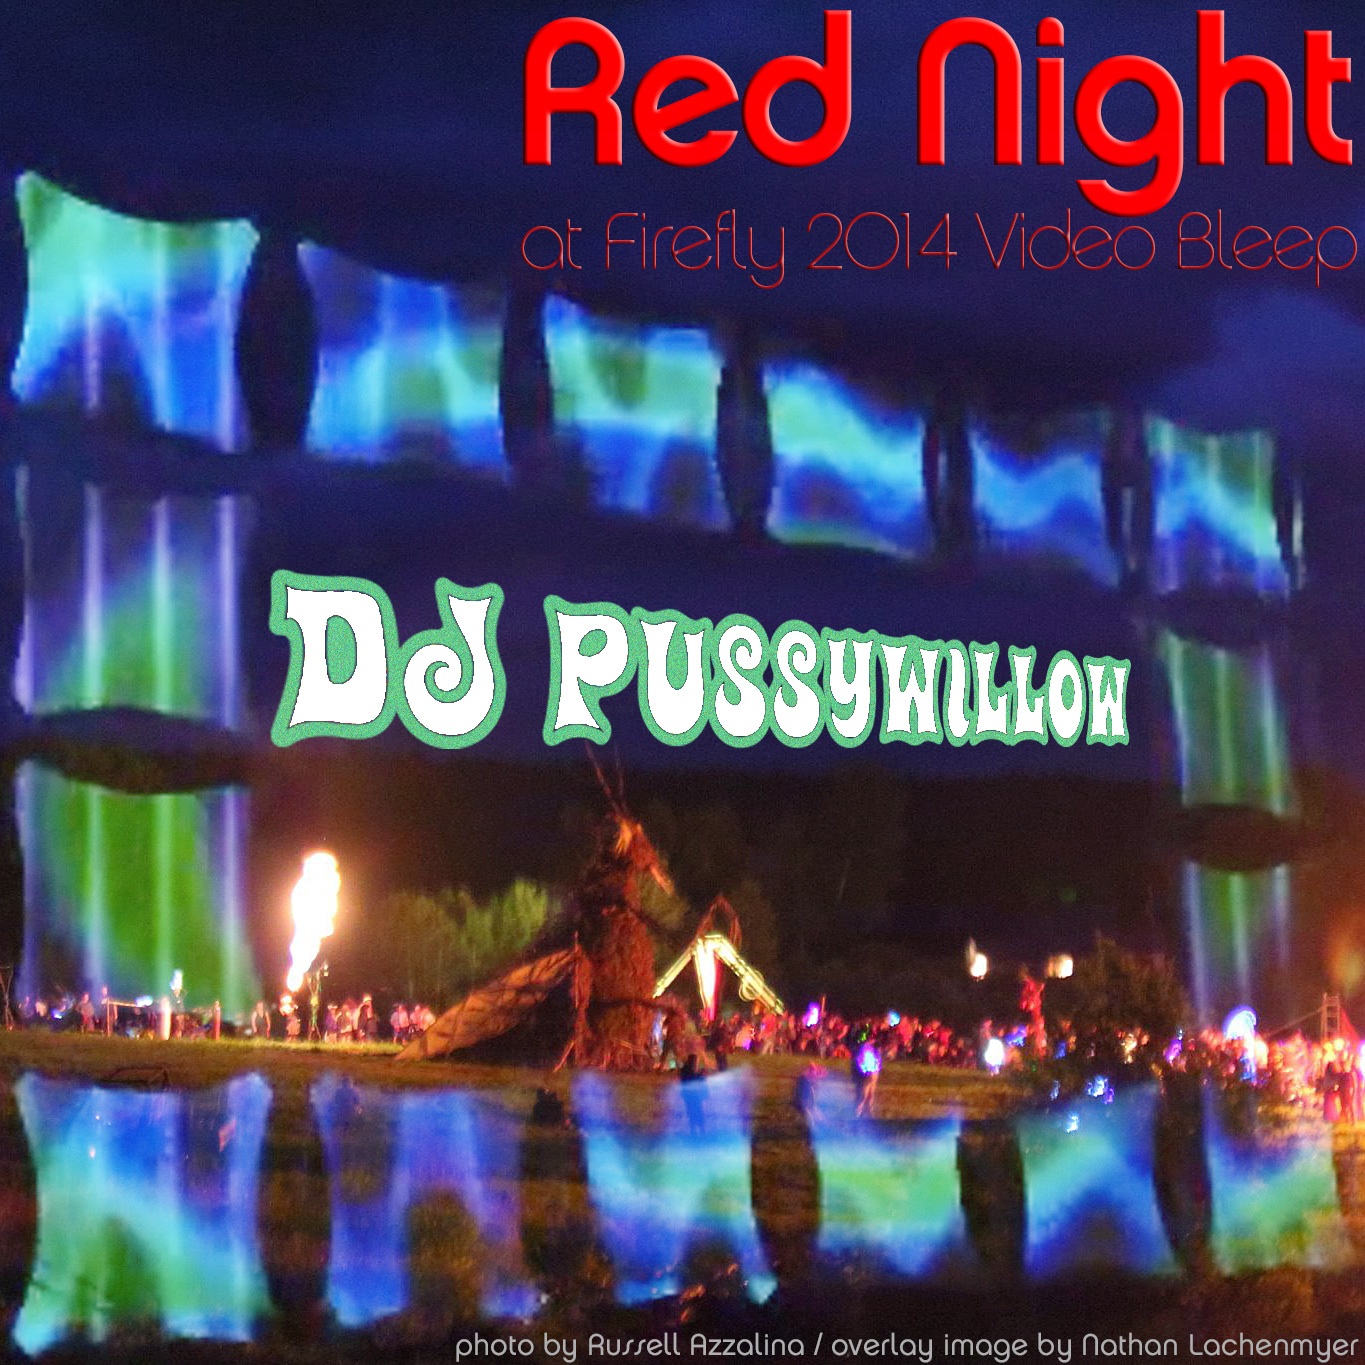 Red Night at Video Bleep - Firefly, July 2, 2014